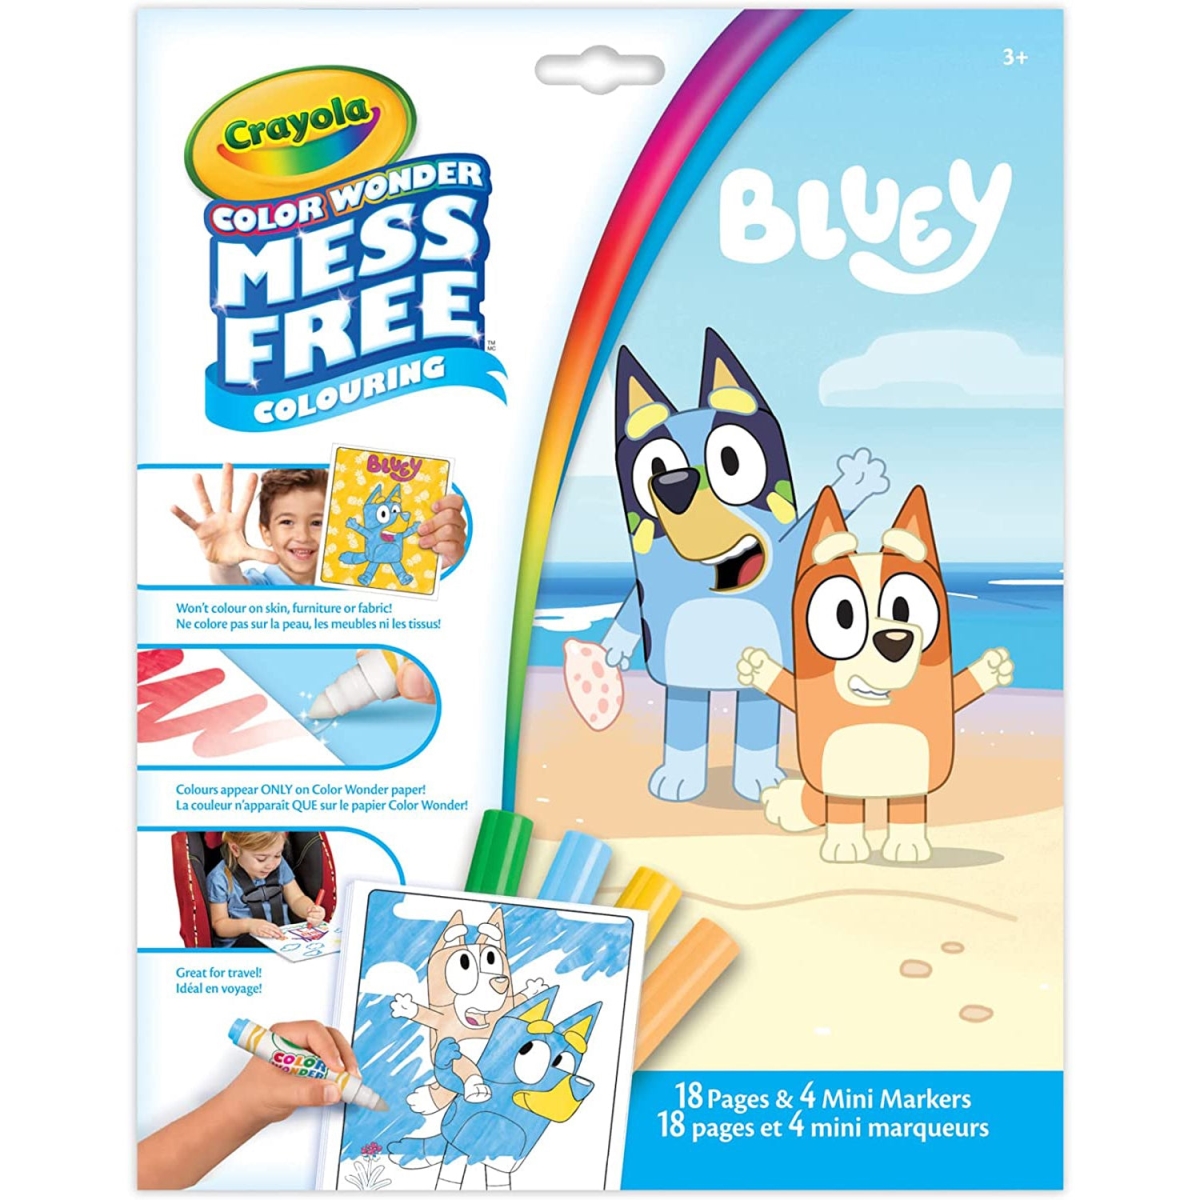 Picture of Crayola 30388950 Bluey Wonder Mess-Free Colouring Pages & Mini Markers